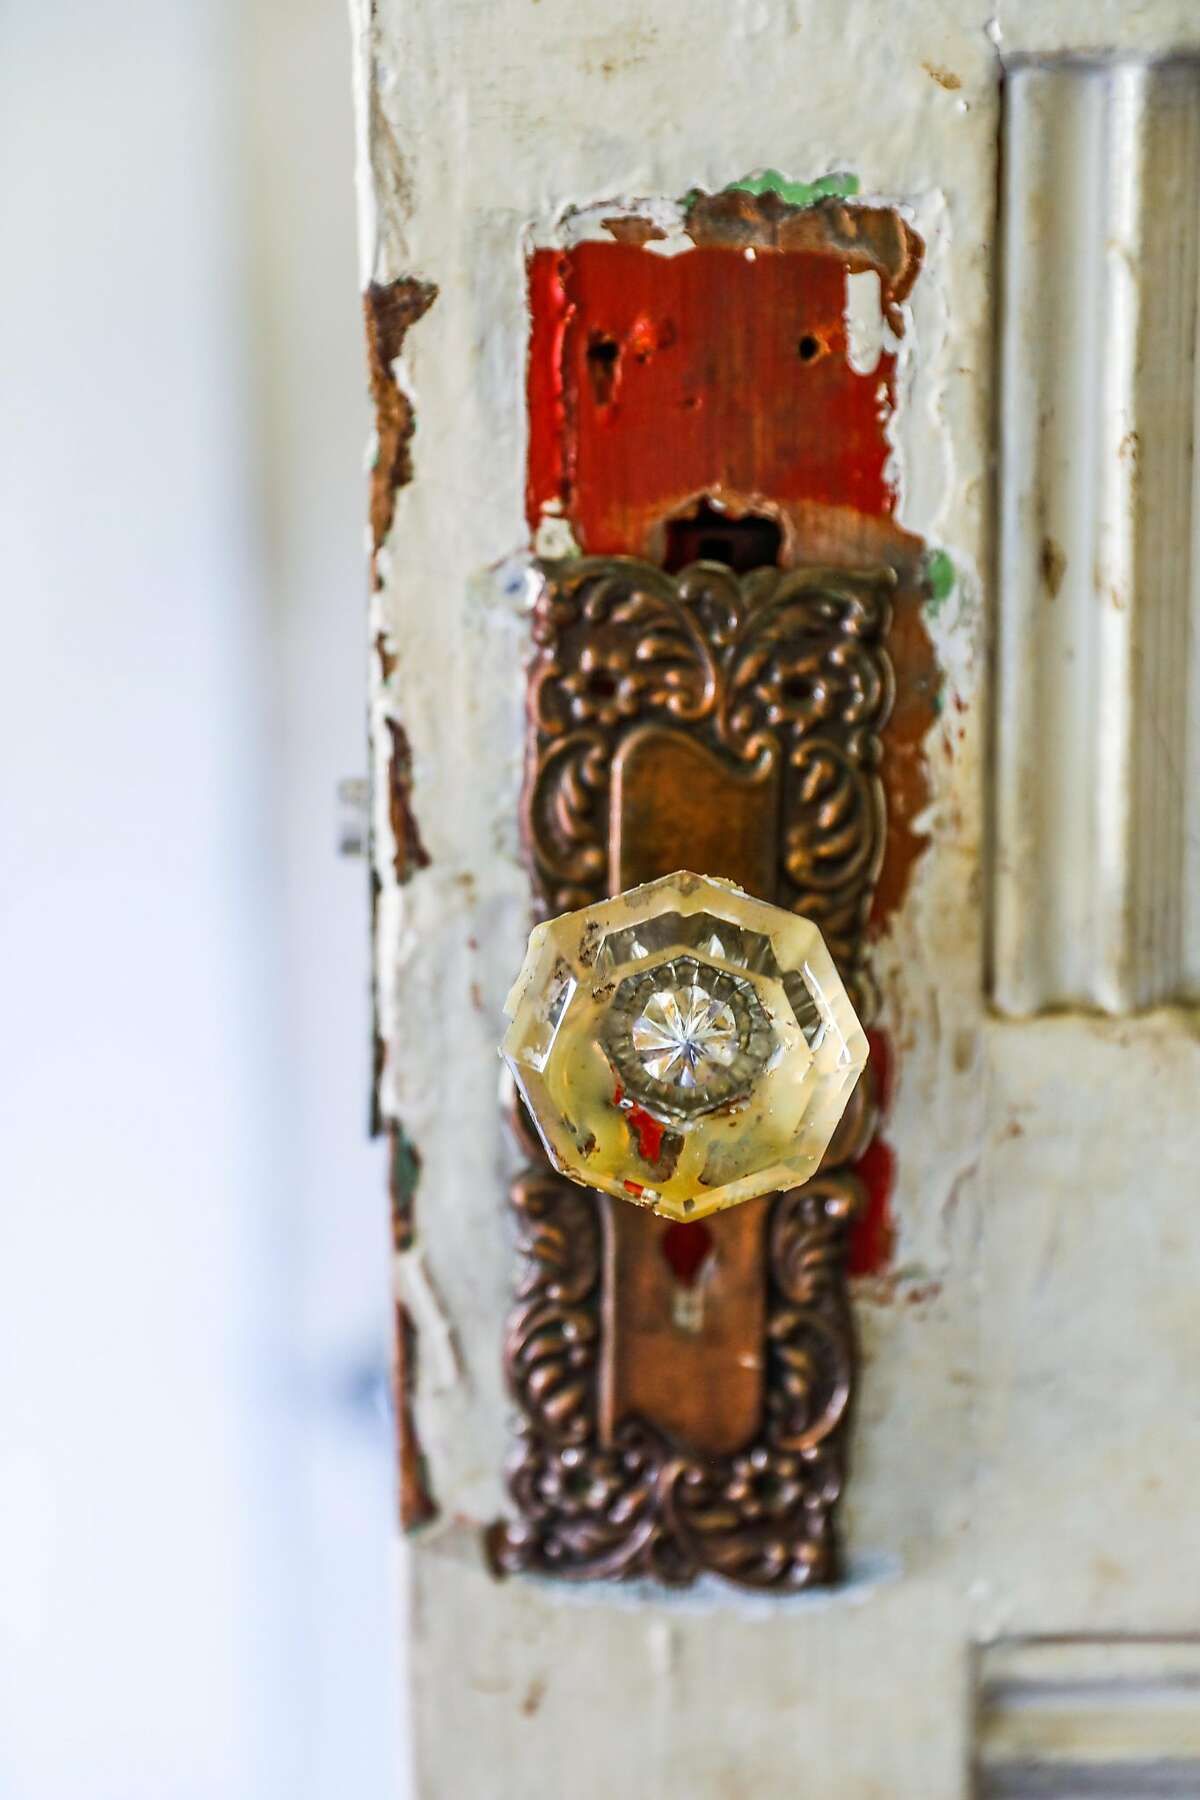 A doorknob in the Pink Painted Lady which was newly purchased on Steiner Street on Tuesday, February 11, 2020 in San Francisco, California.